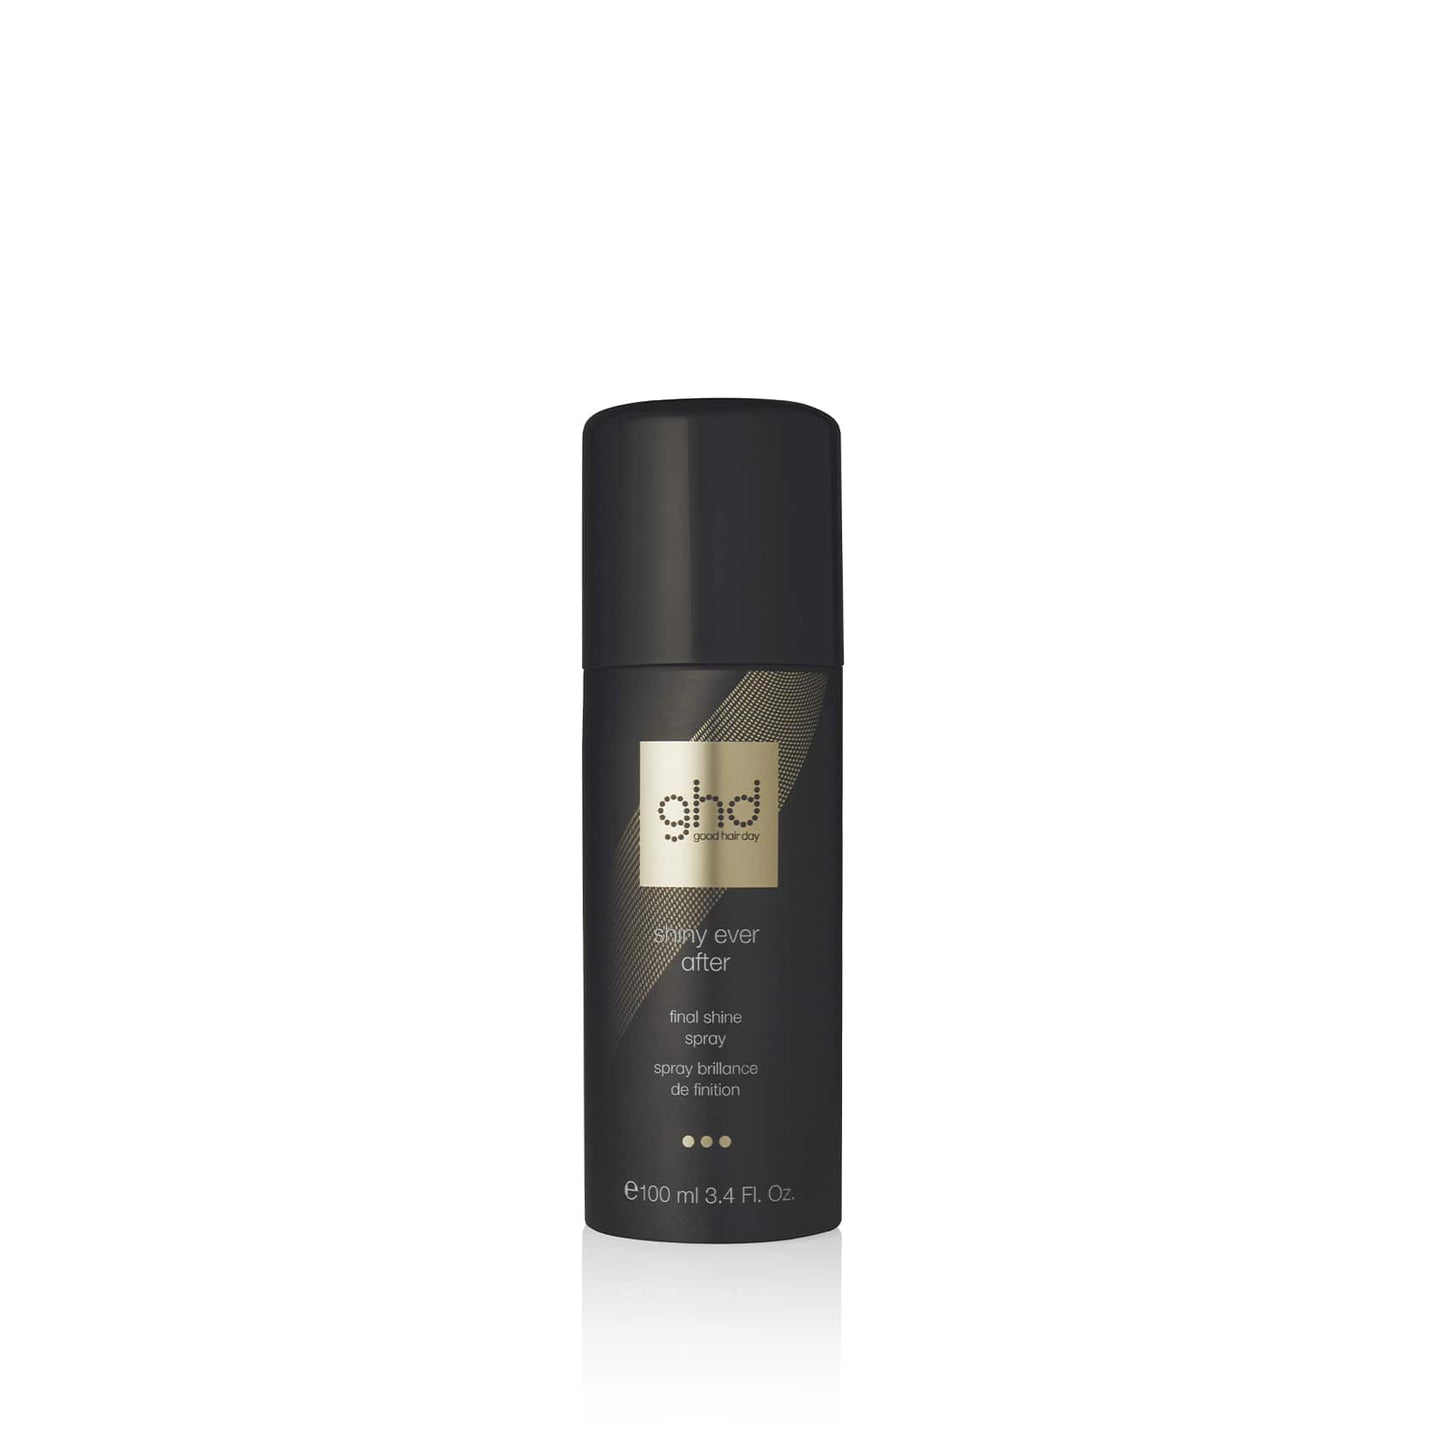 GHD Shiny ever after finish spray